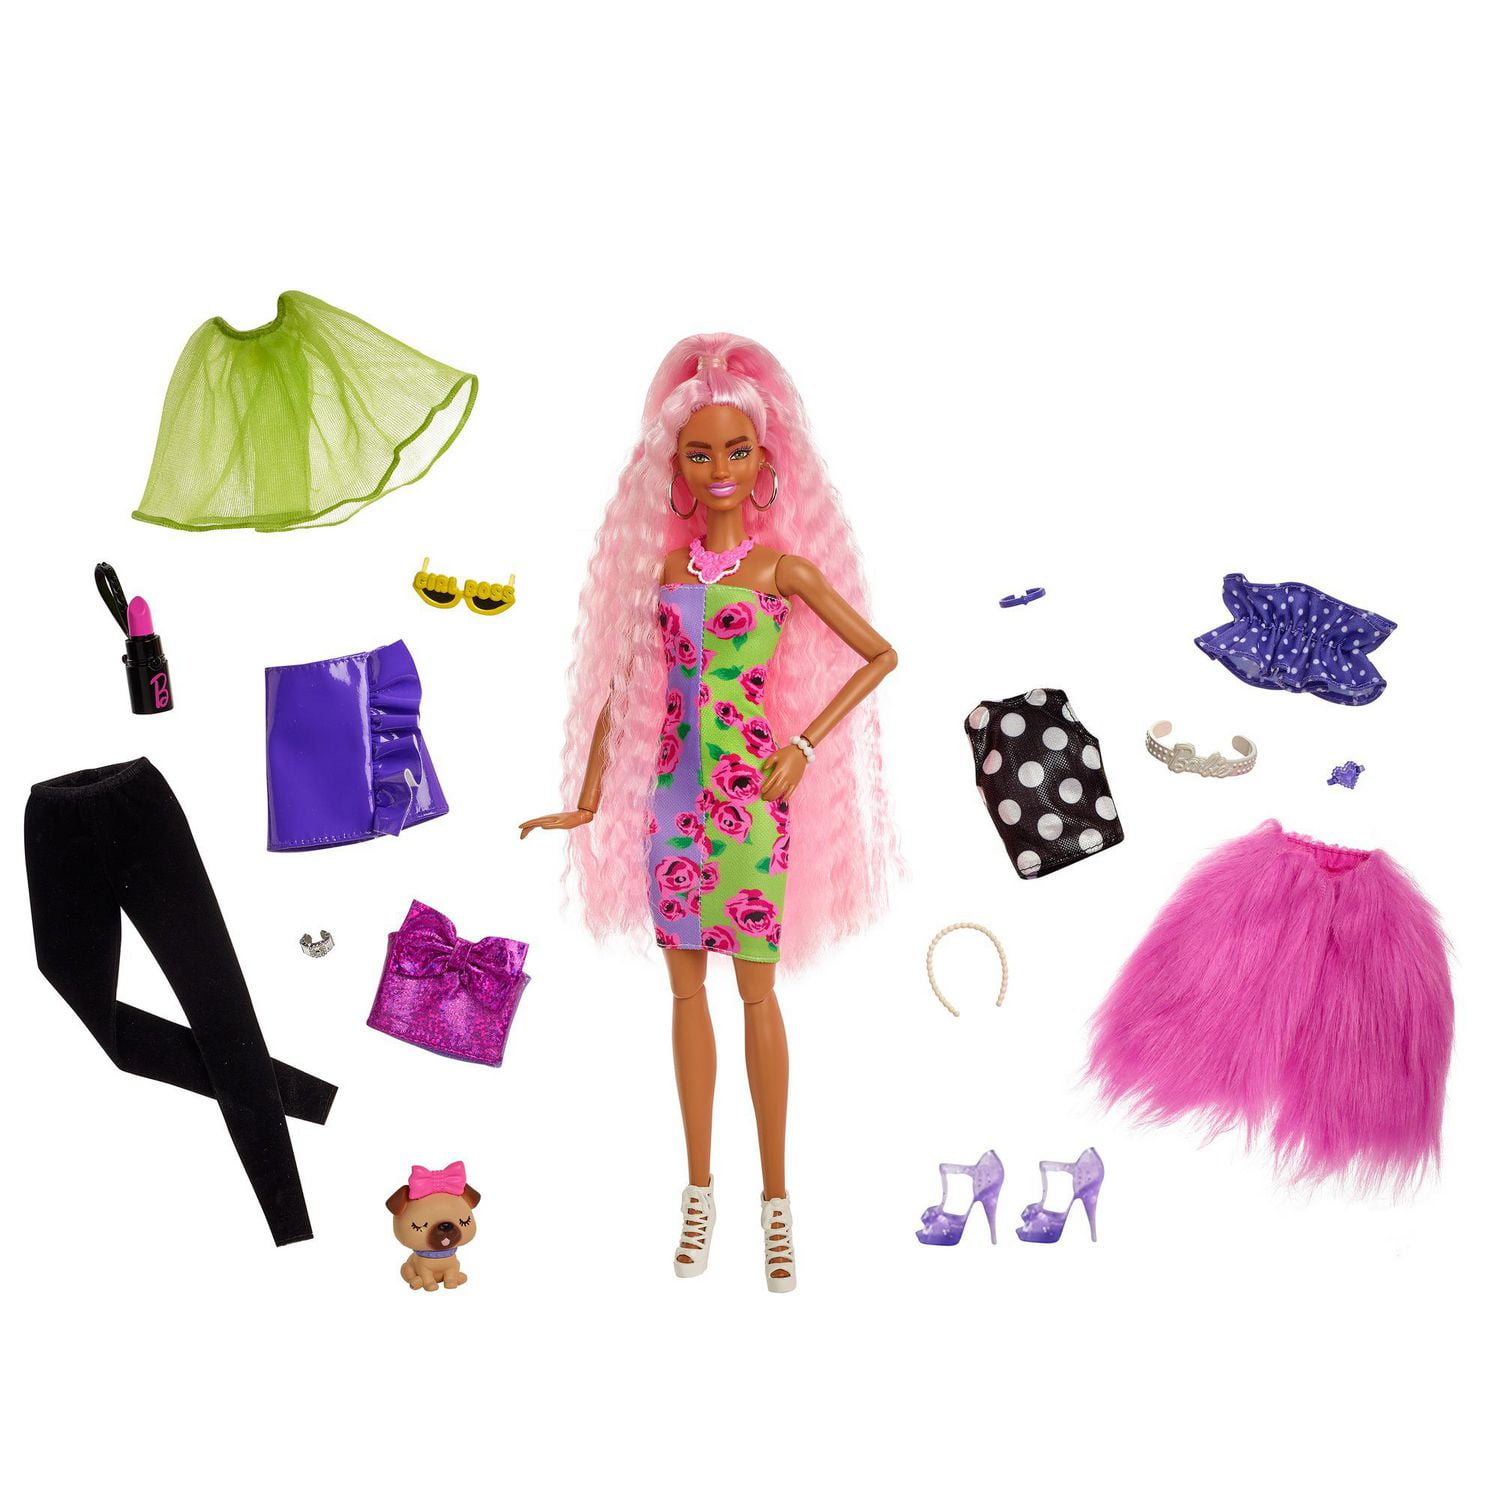 Barbie Extra Deluxe Doll & Accessories Set with Pet, Mix & Match Pieces for  30+ Looks 